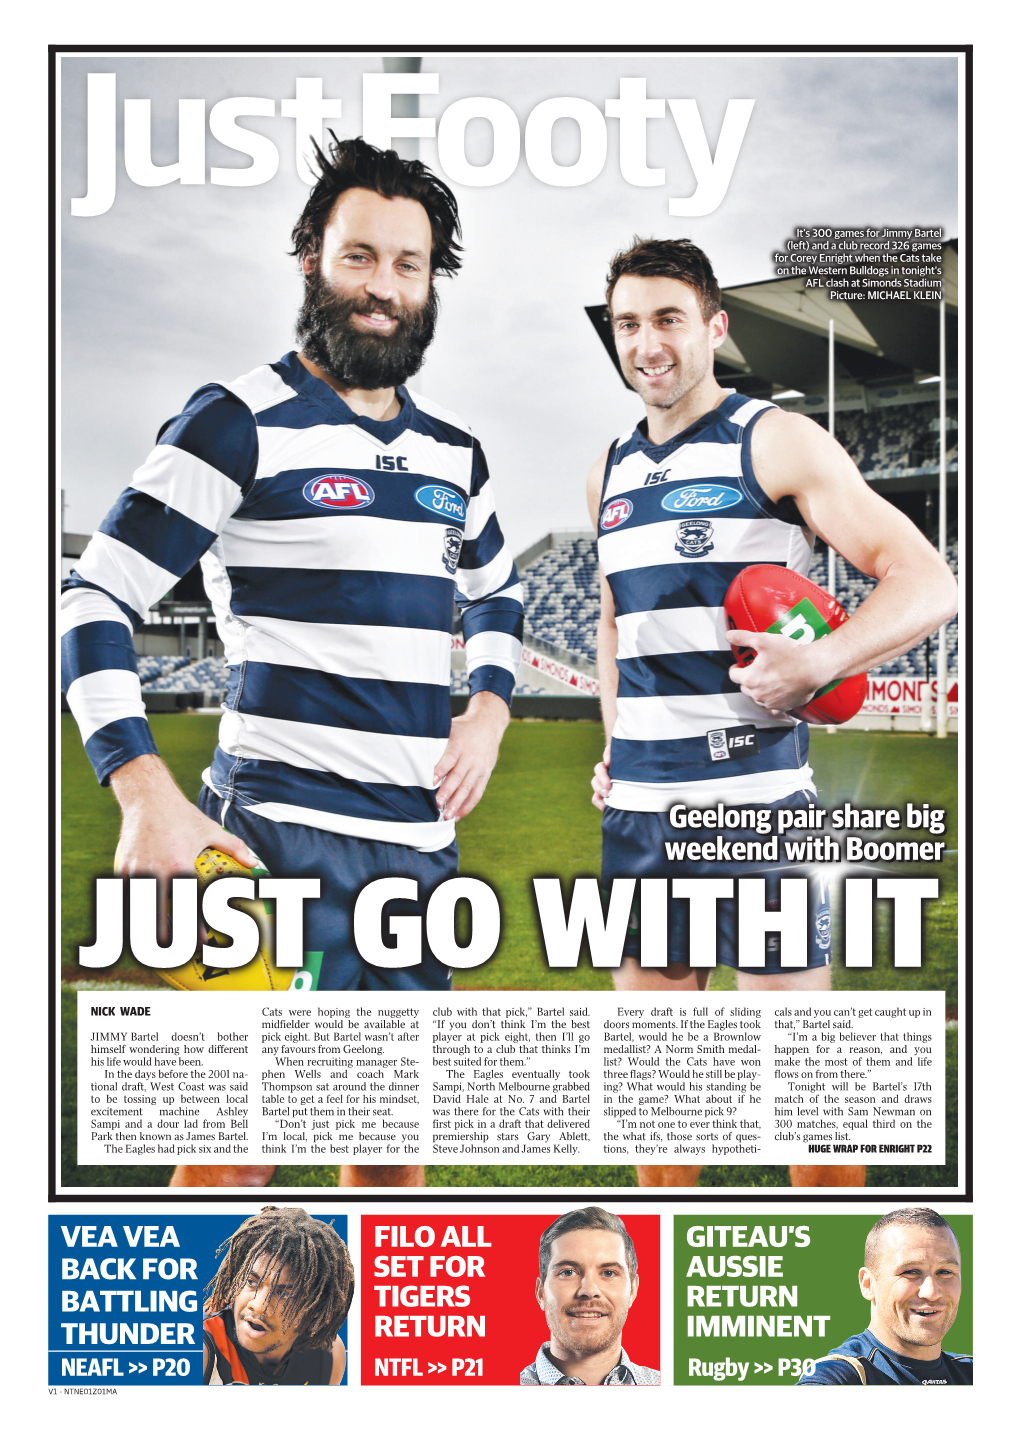 Geelong Pair Share Big Weekend with Boomer